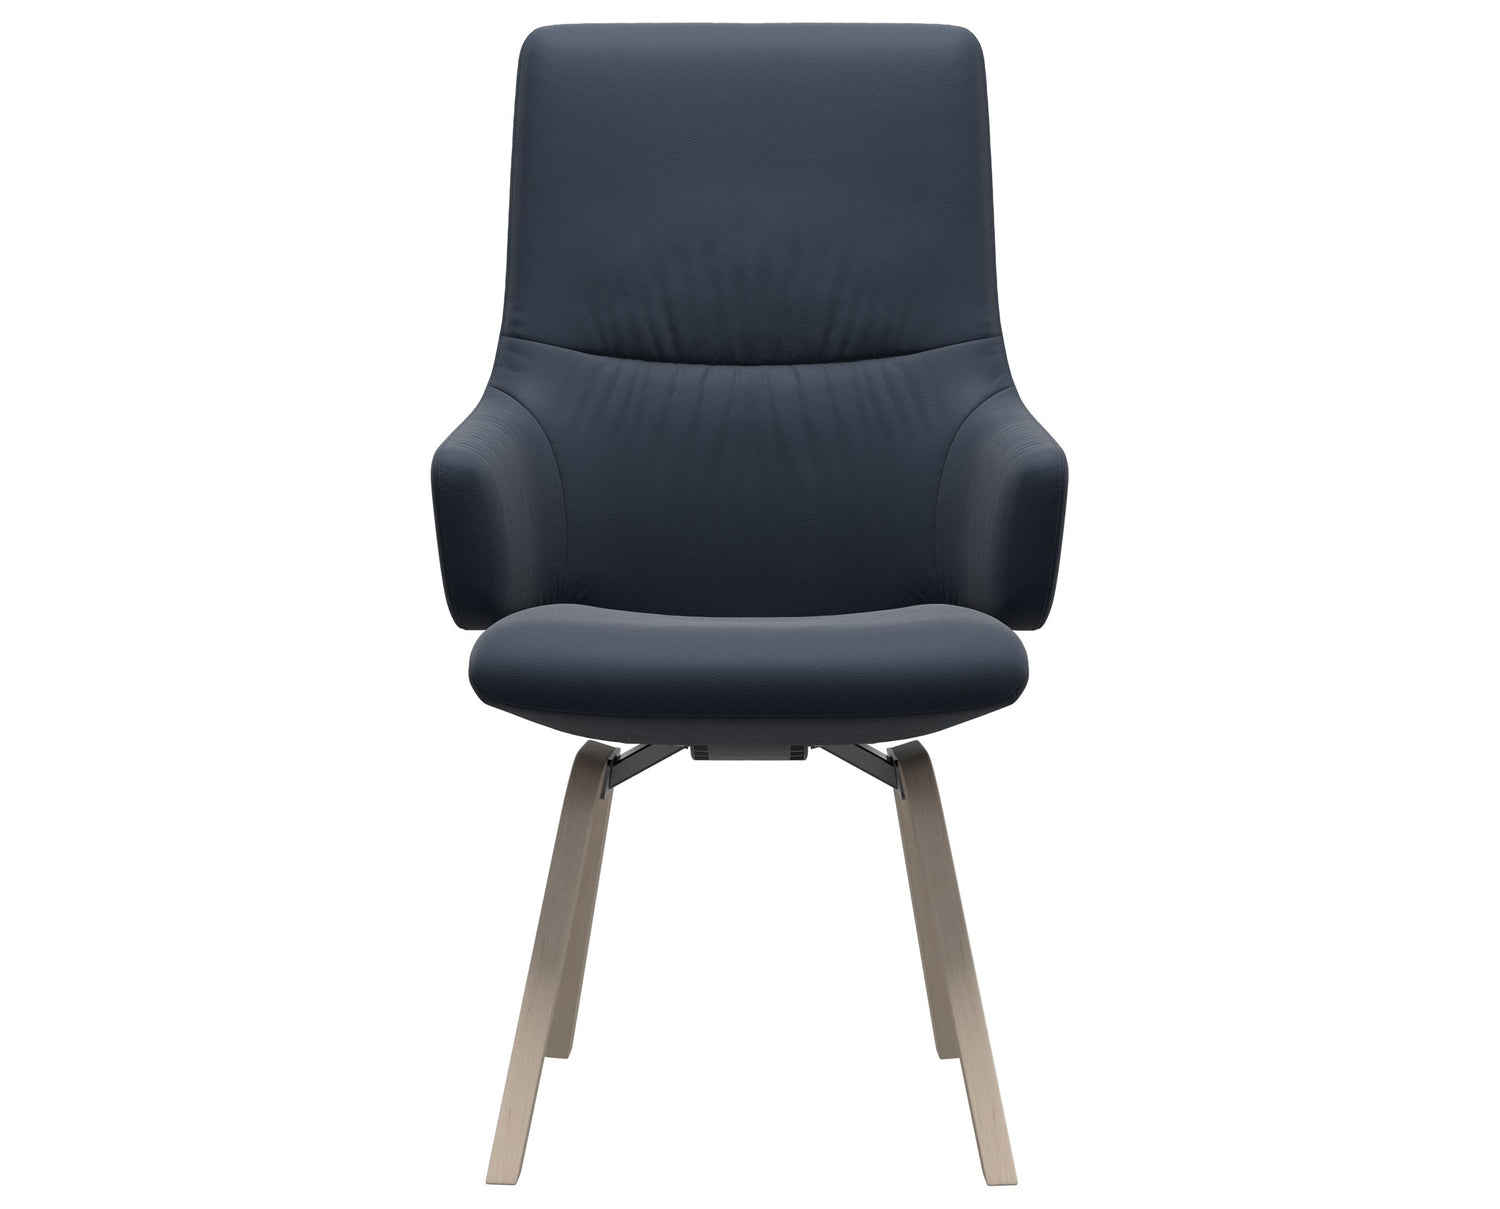 Paloma Leather Oxford Blue & Whitewash Base | Stressless Mint High Back D200 Dining Chair w/Arms | Valley Ridge Furniture